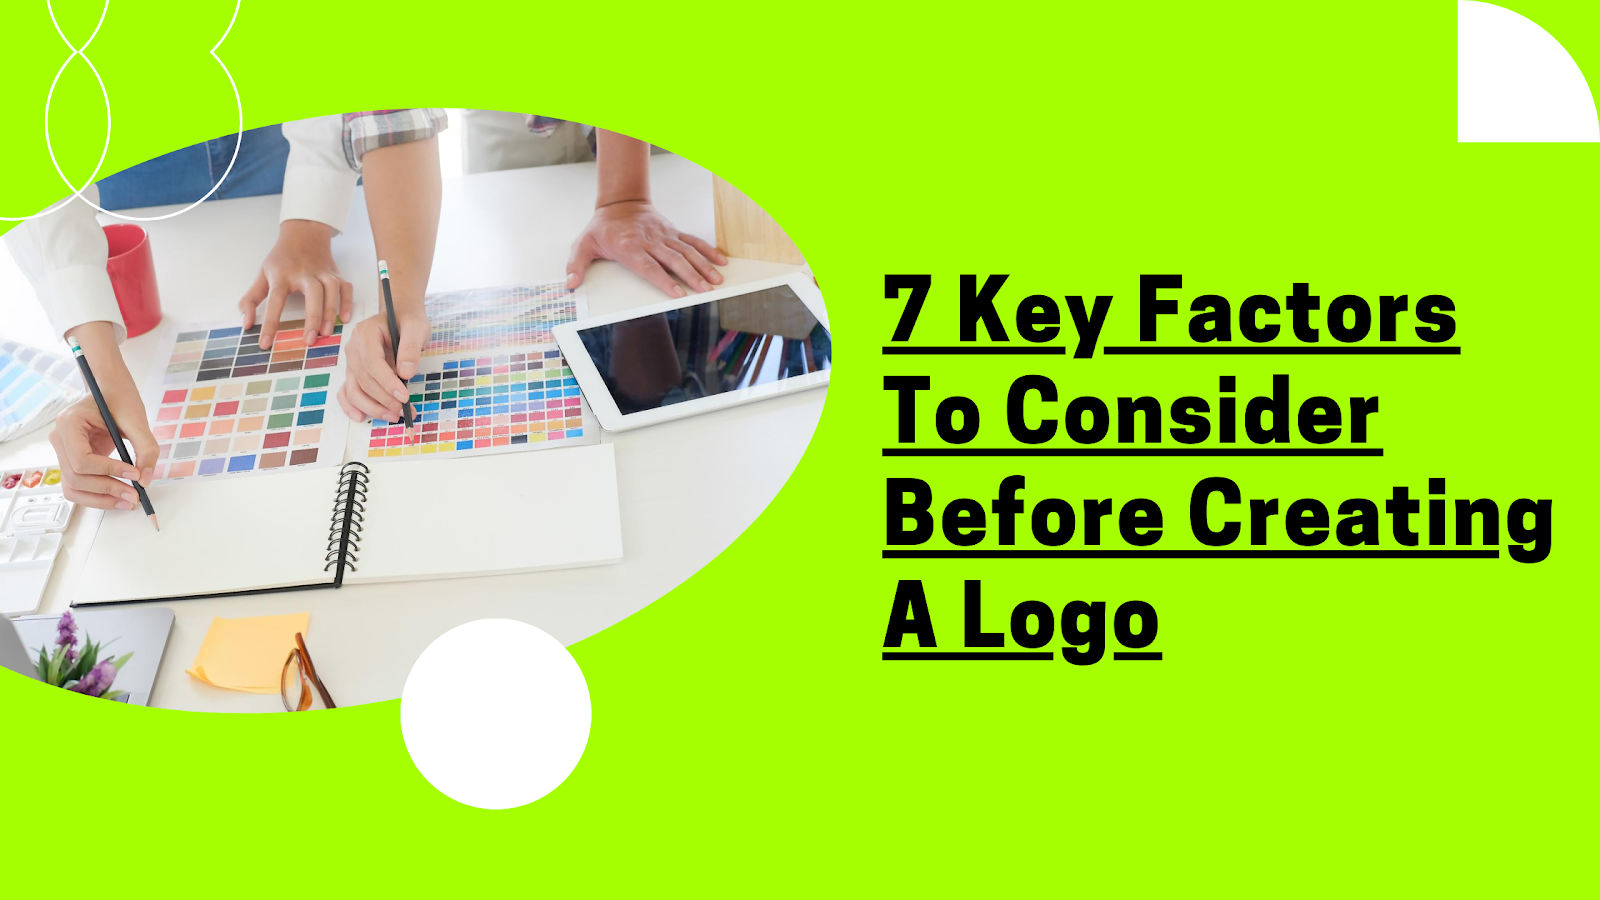 Key Factors To Consider Before Creating A Logo